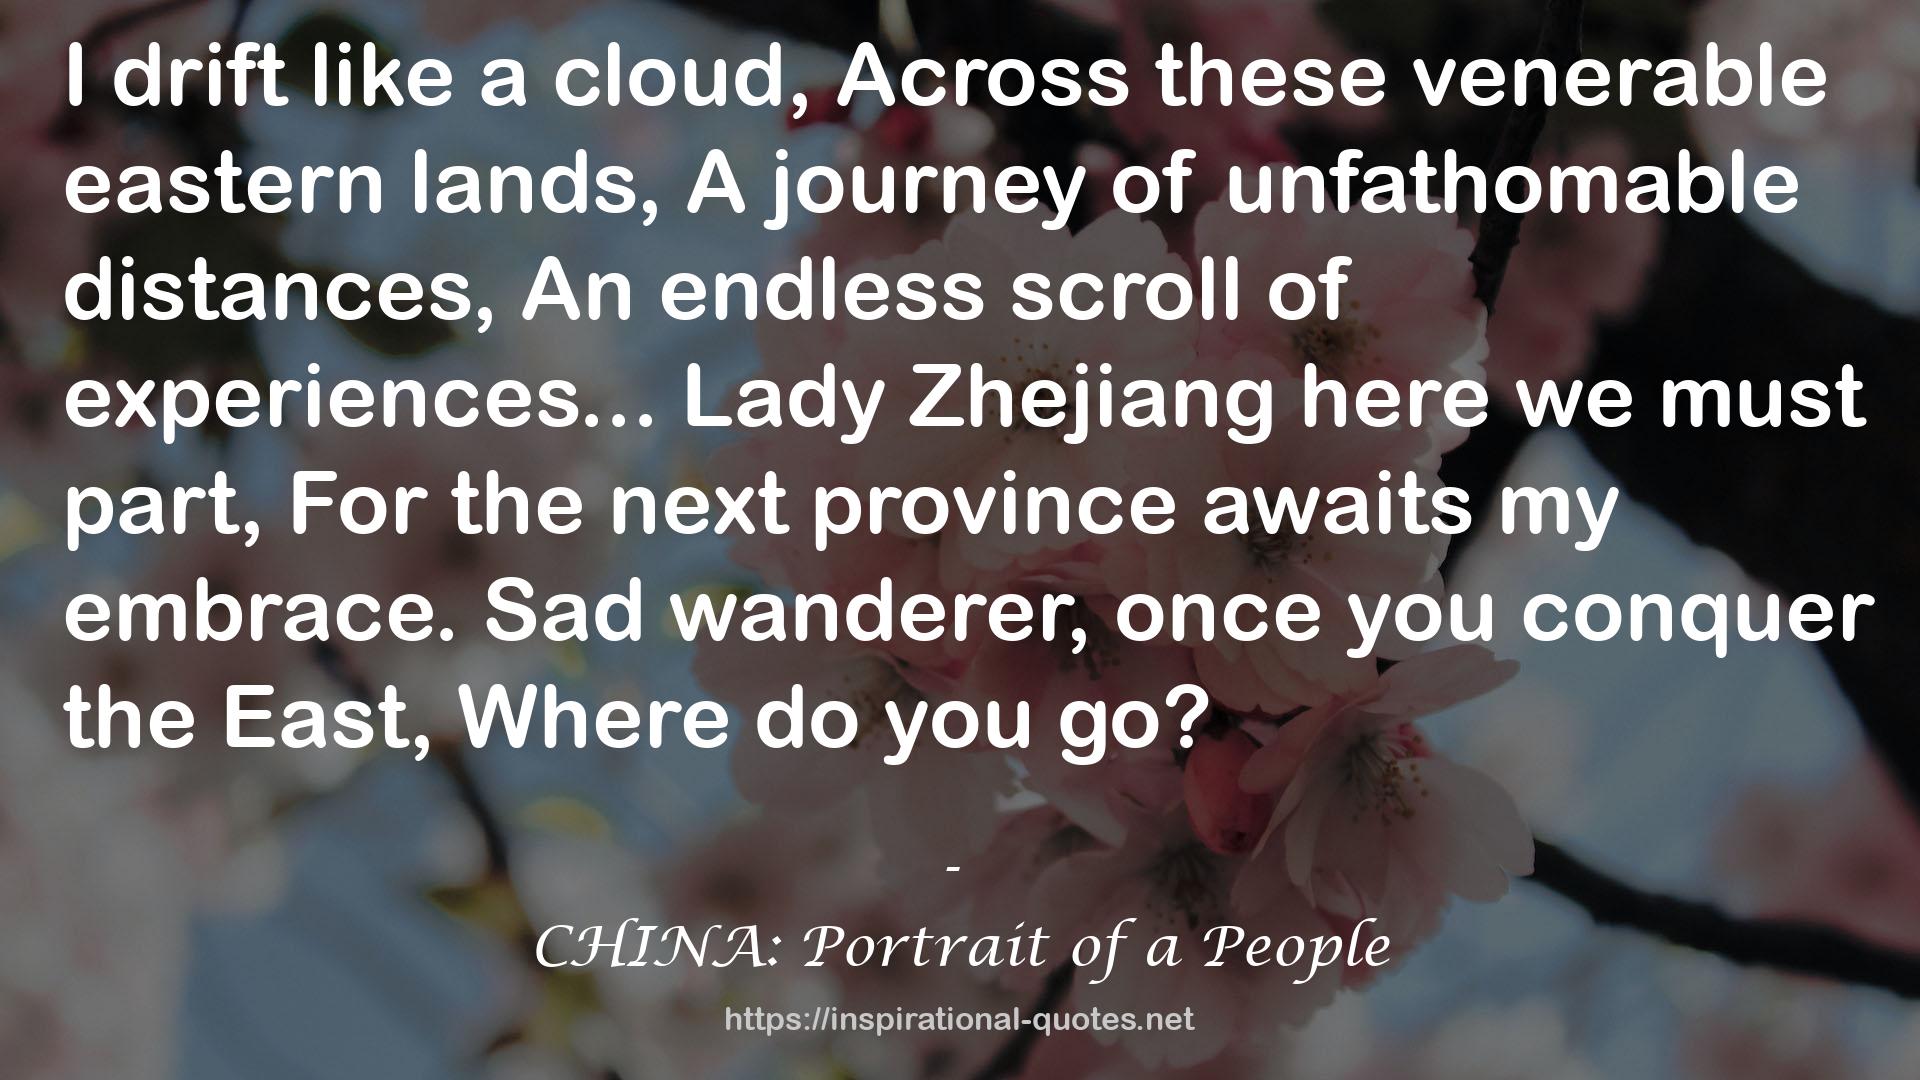 CHINA: Portrait of a People QUOTES